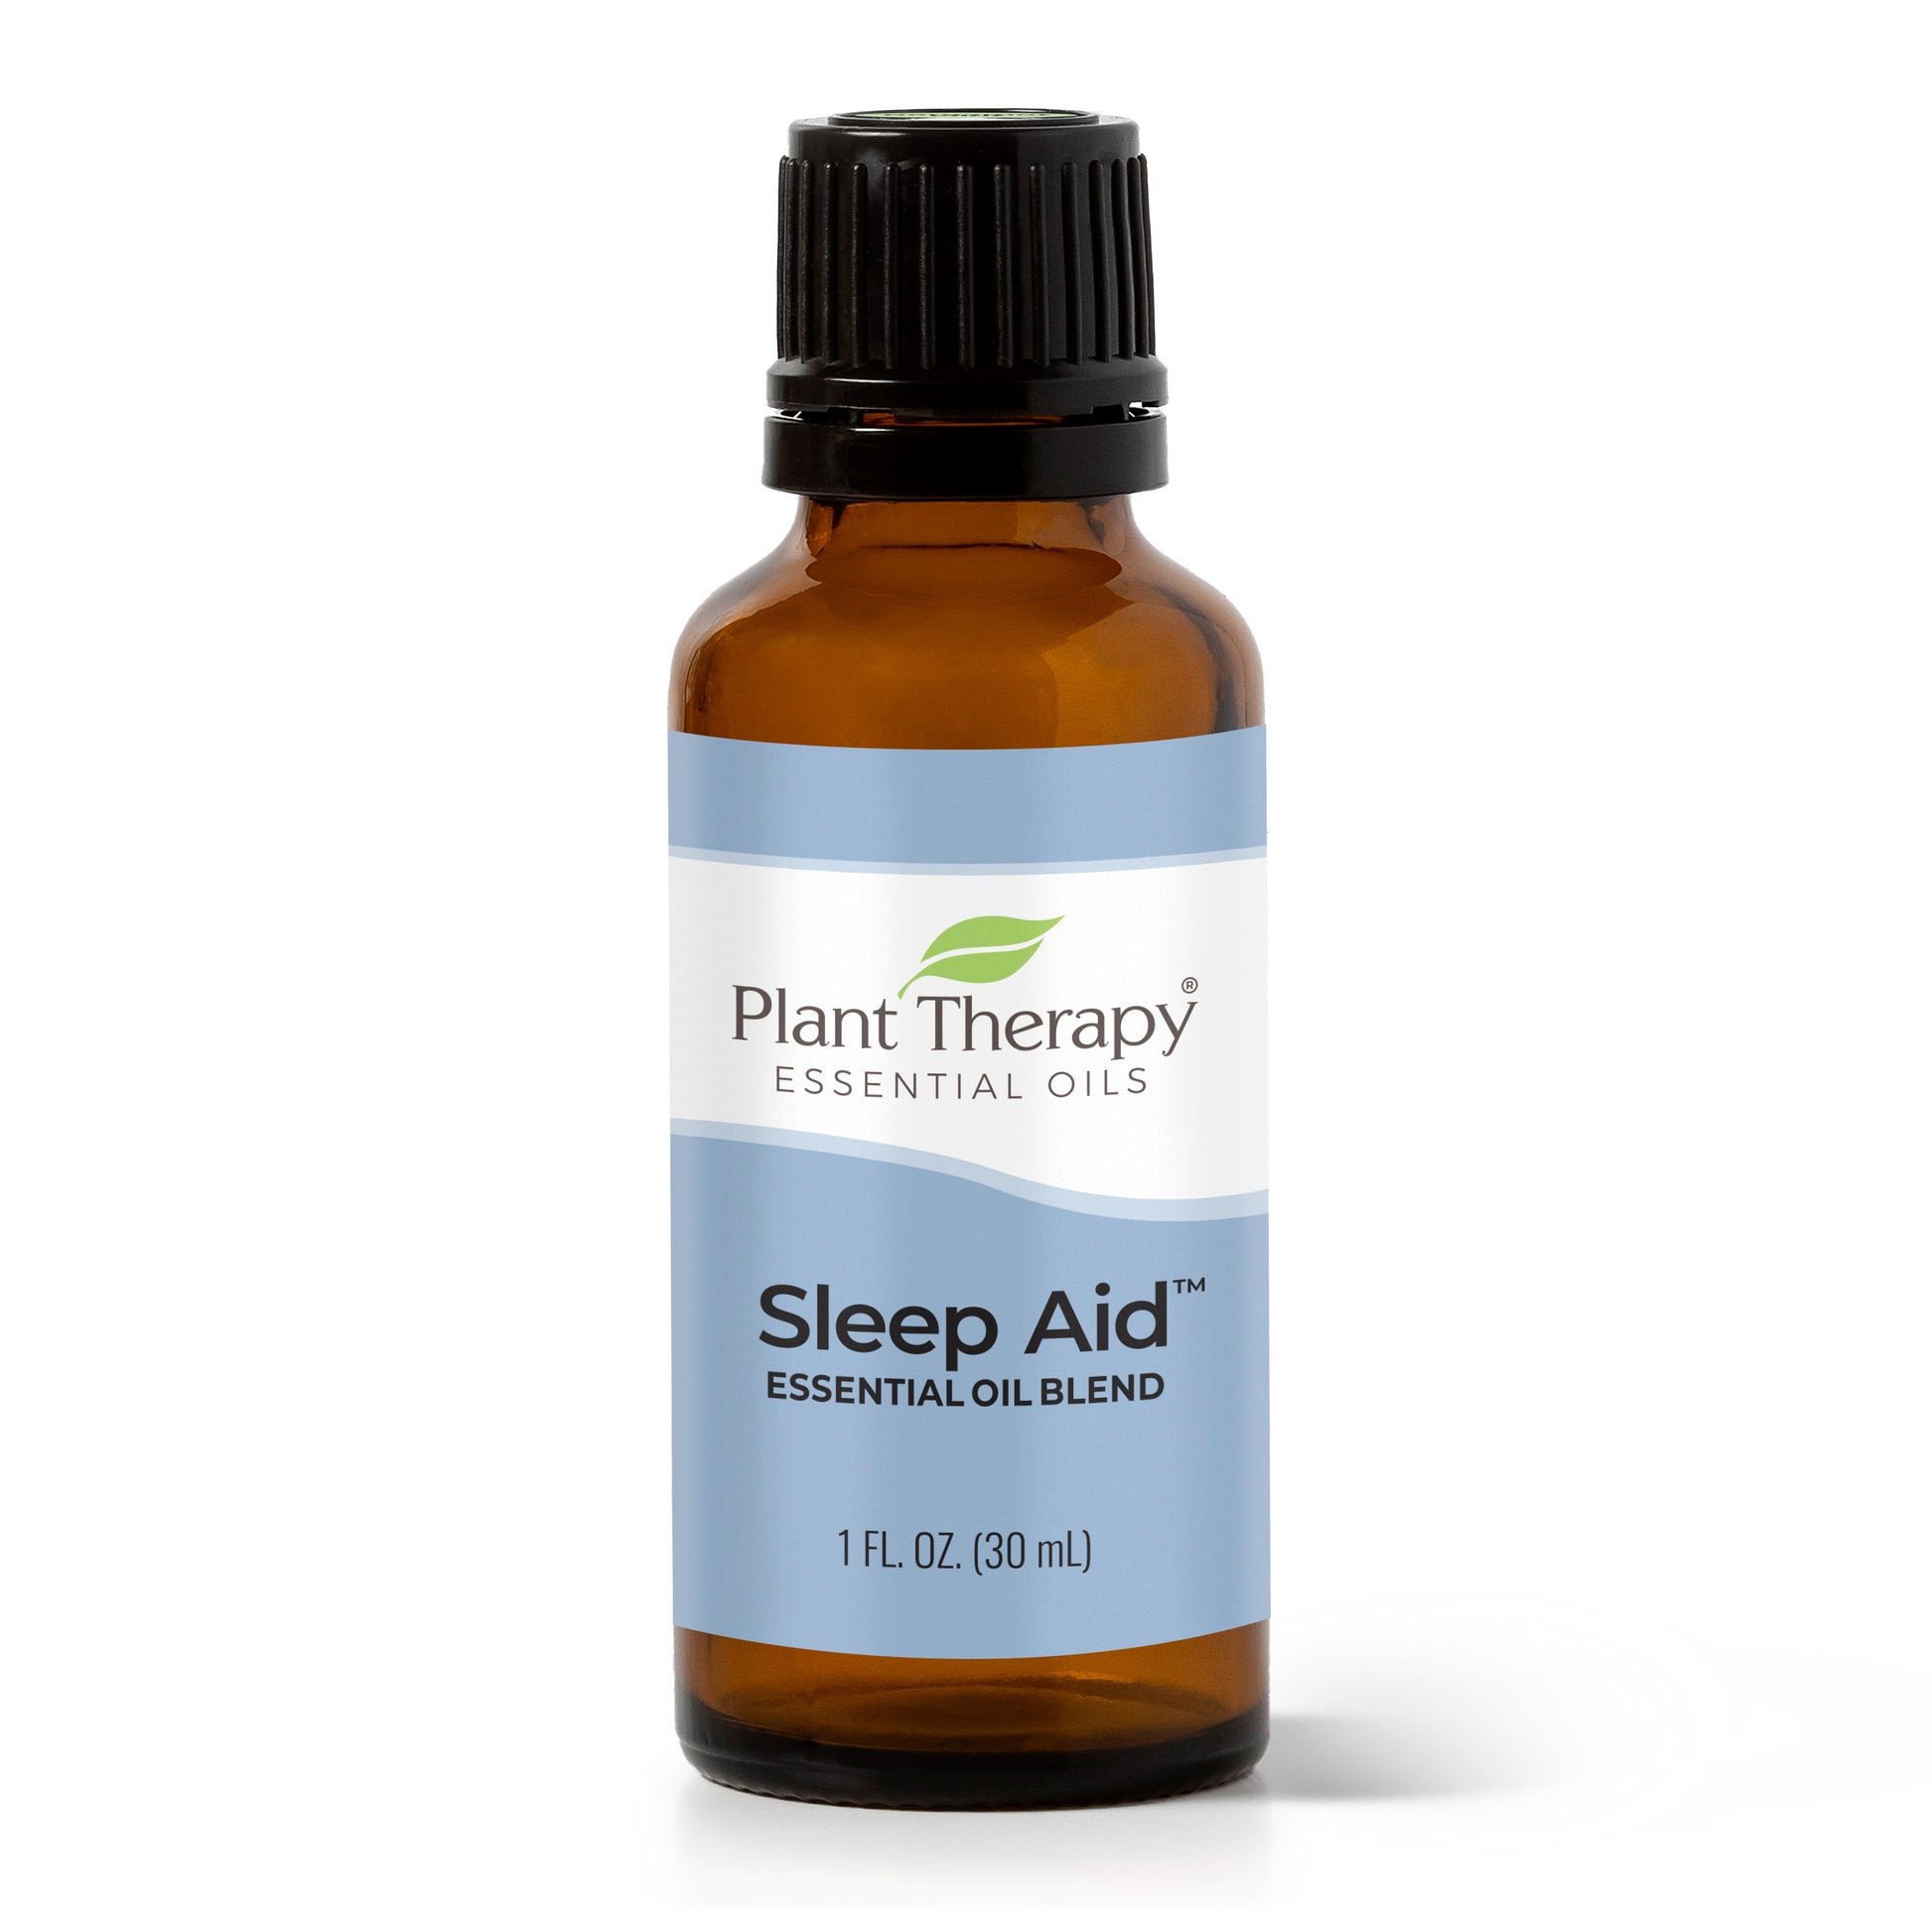 Plant Therapy Island Daydreamin' Essential Oil Blend Set